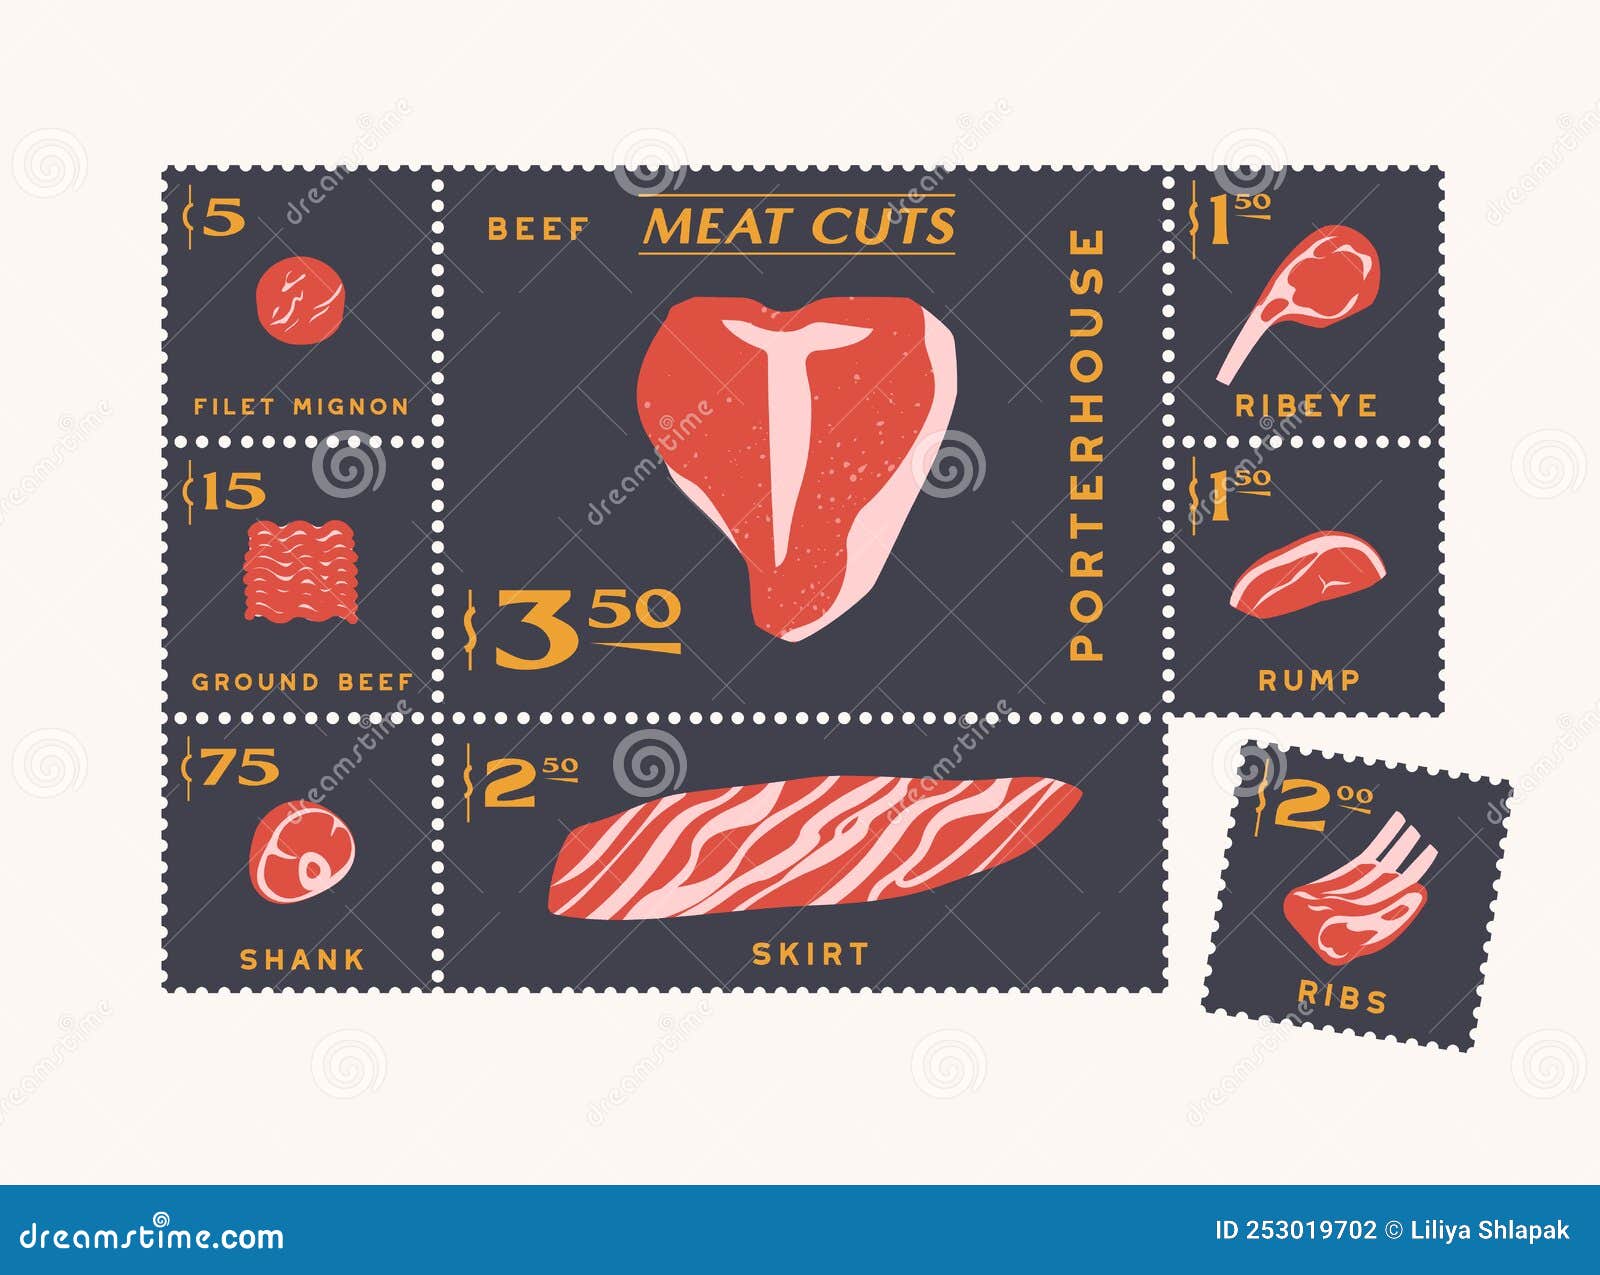 Beef Cuts, Meat Icons in Post Stamps Style Stock Vector - Illustration ...